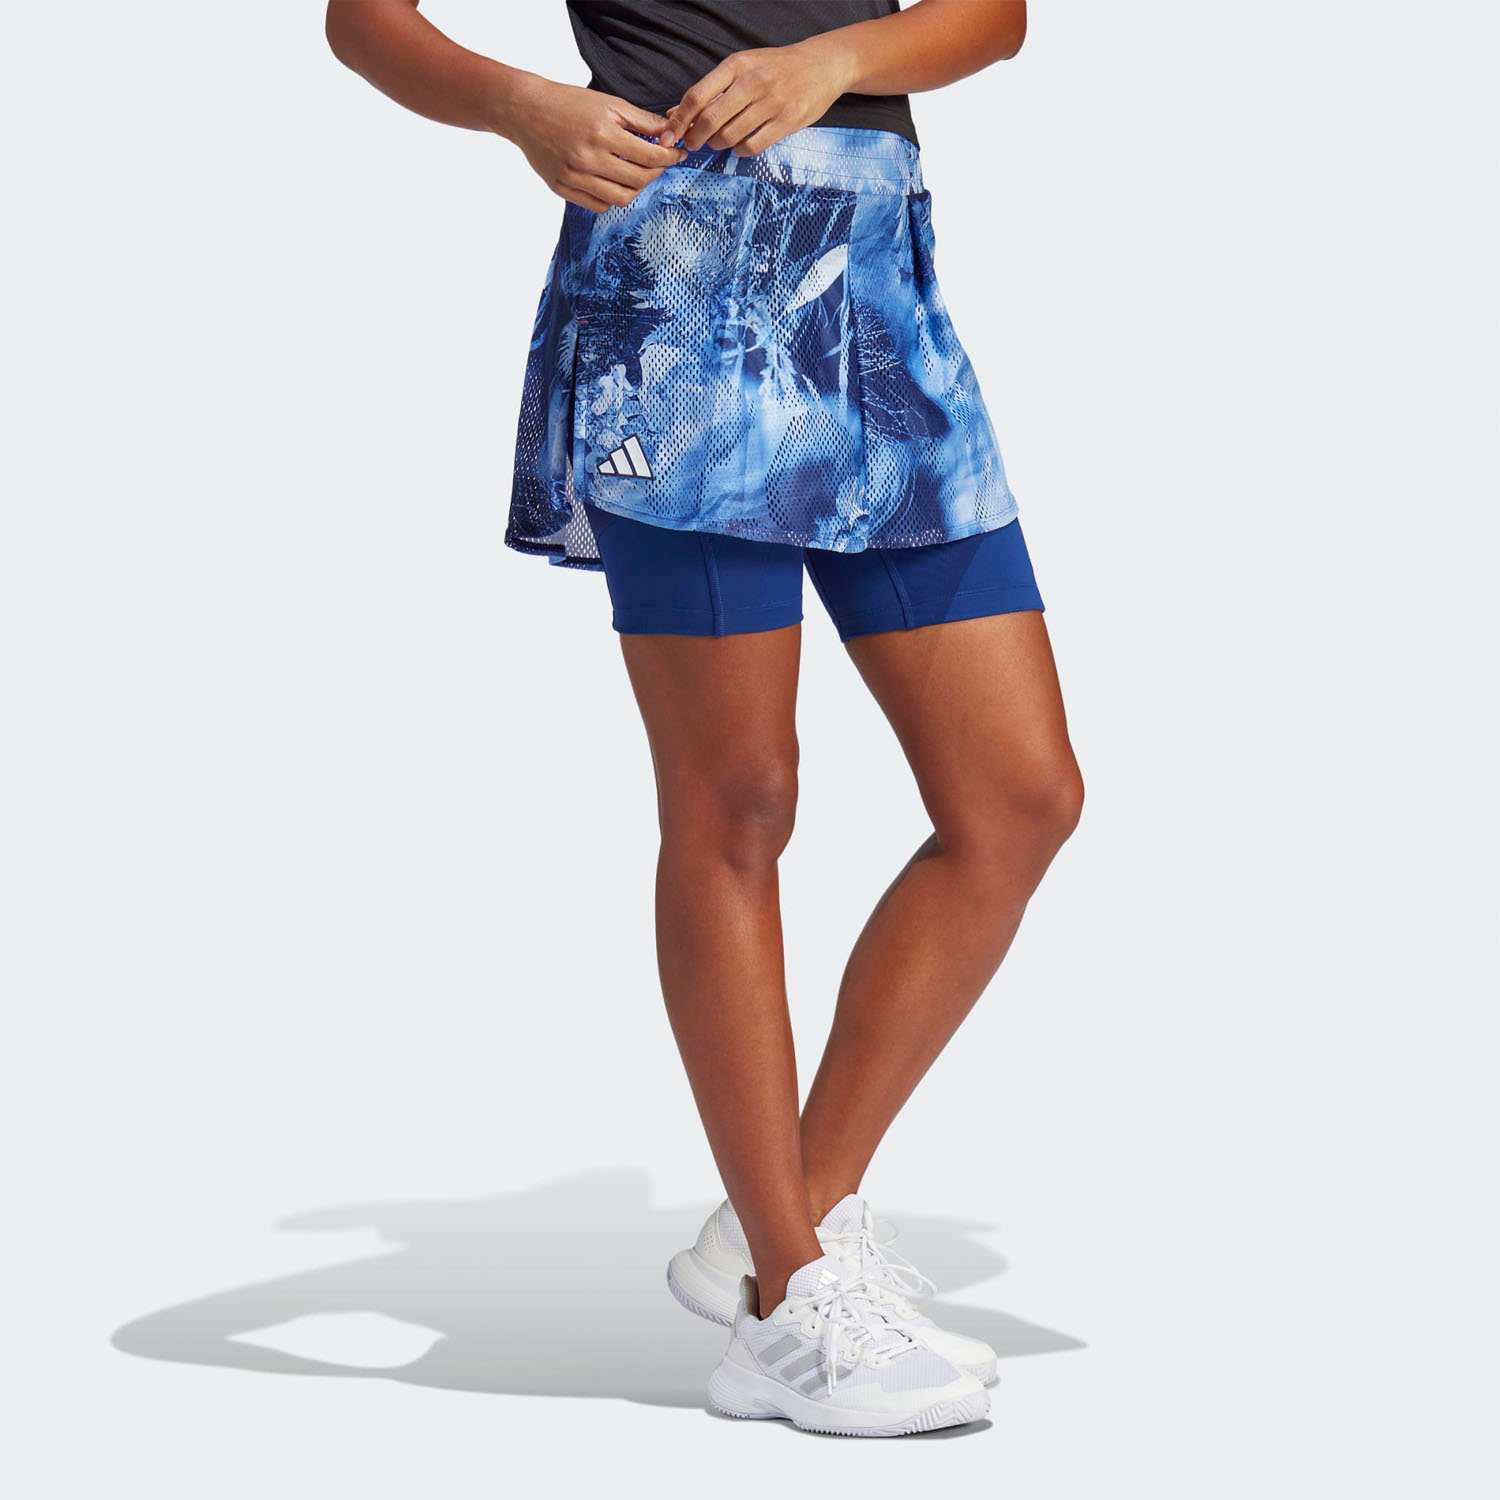 adidas Melbourne Skirt - Multicolor/Victory Blue/White